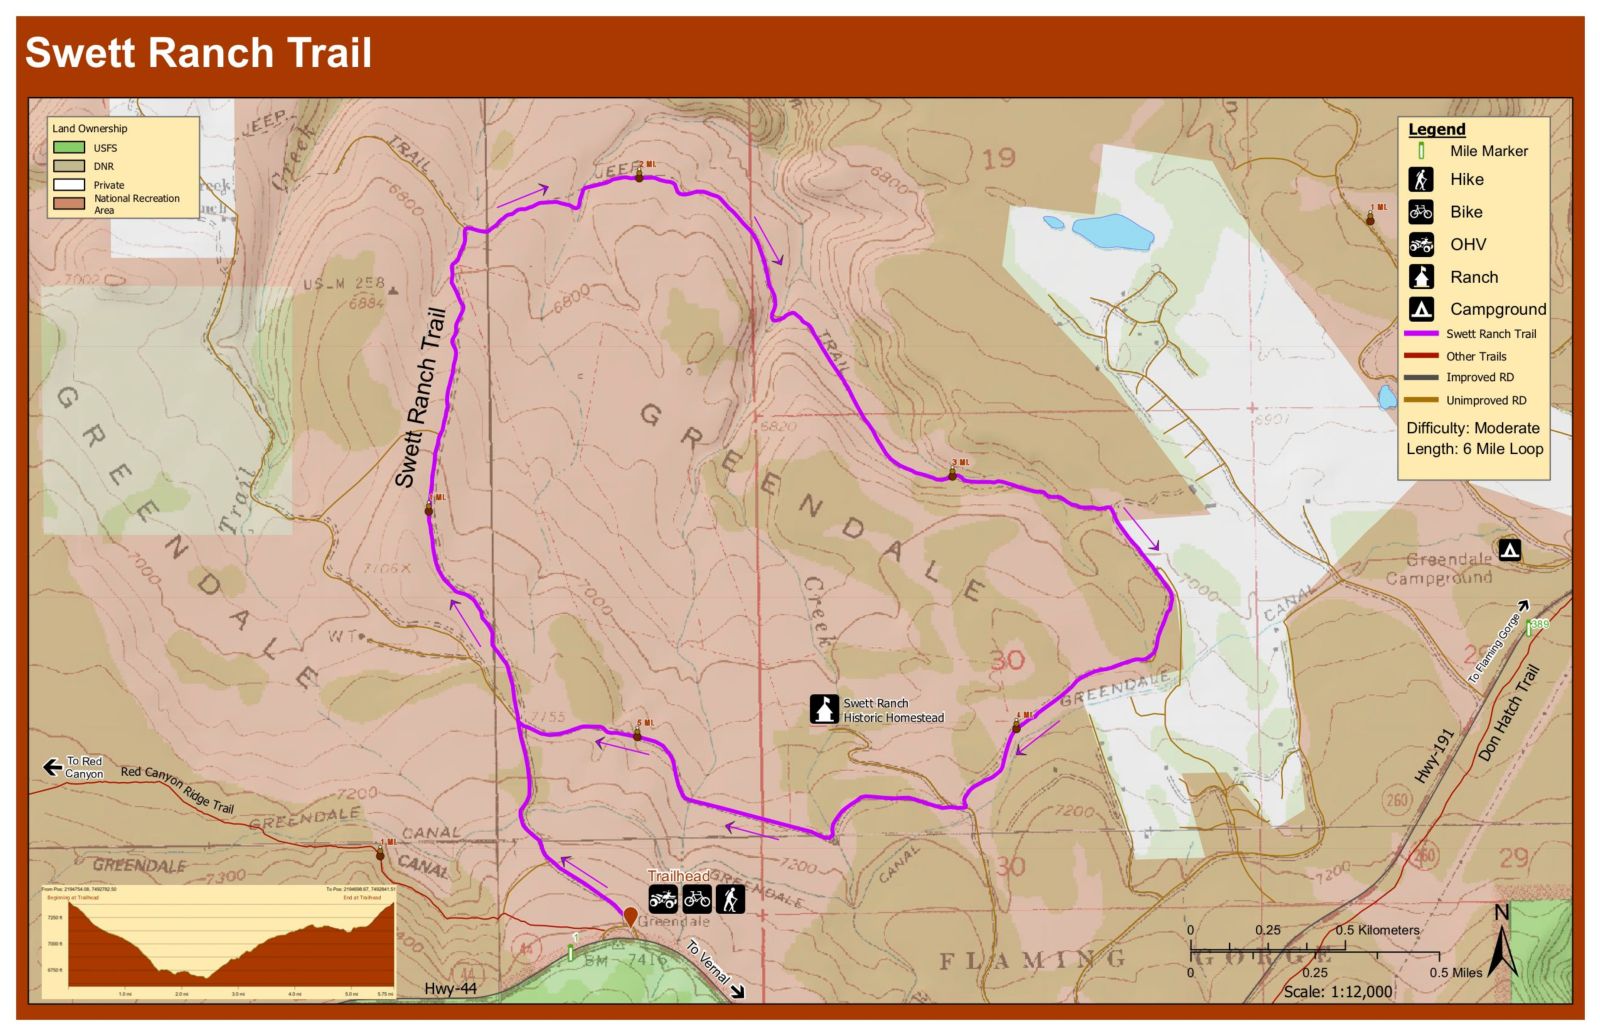 Swett Ranch Trail Map - Flaming Gorge